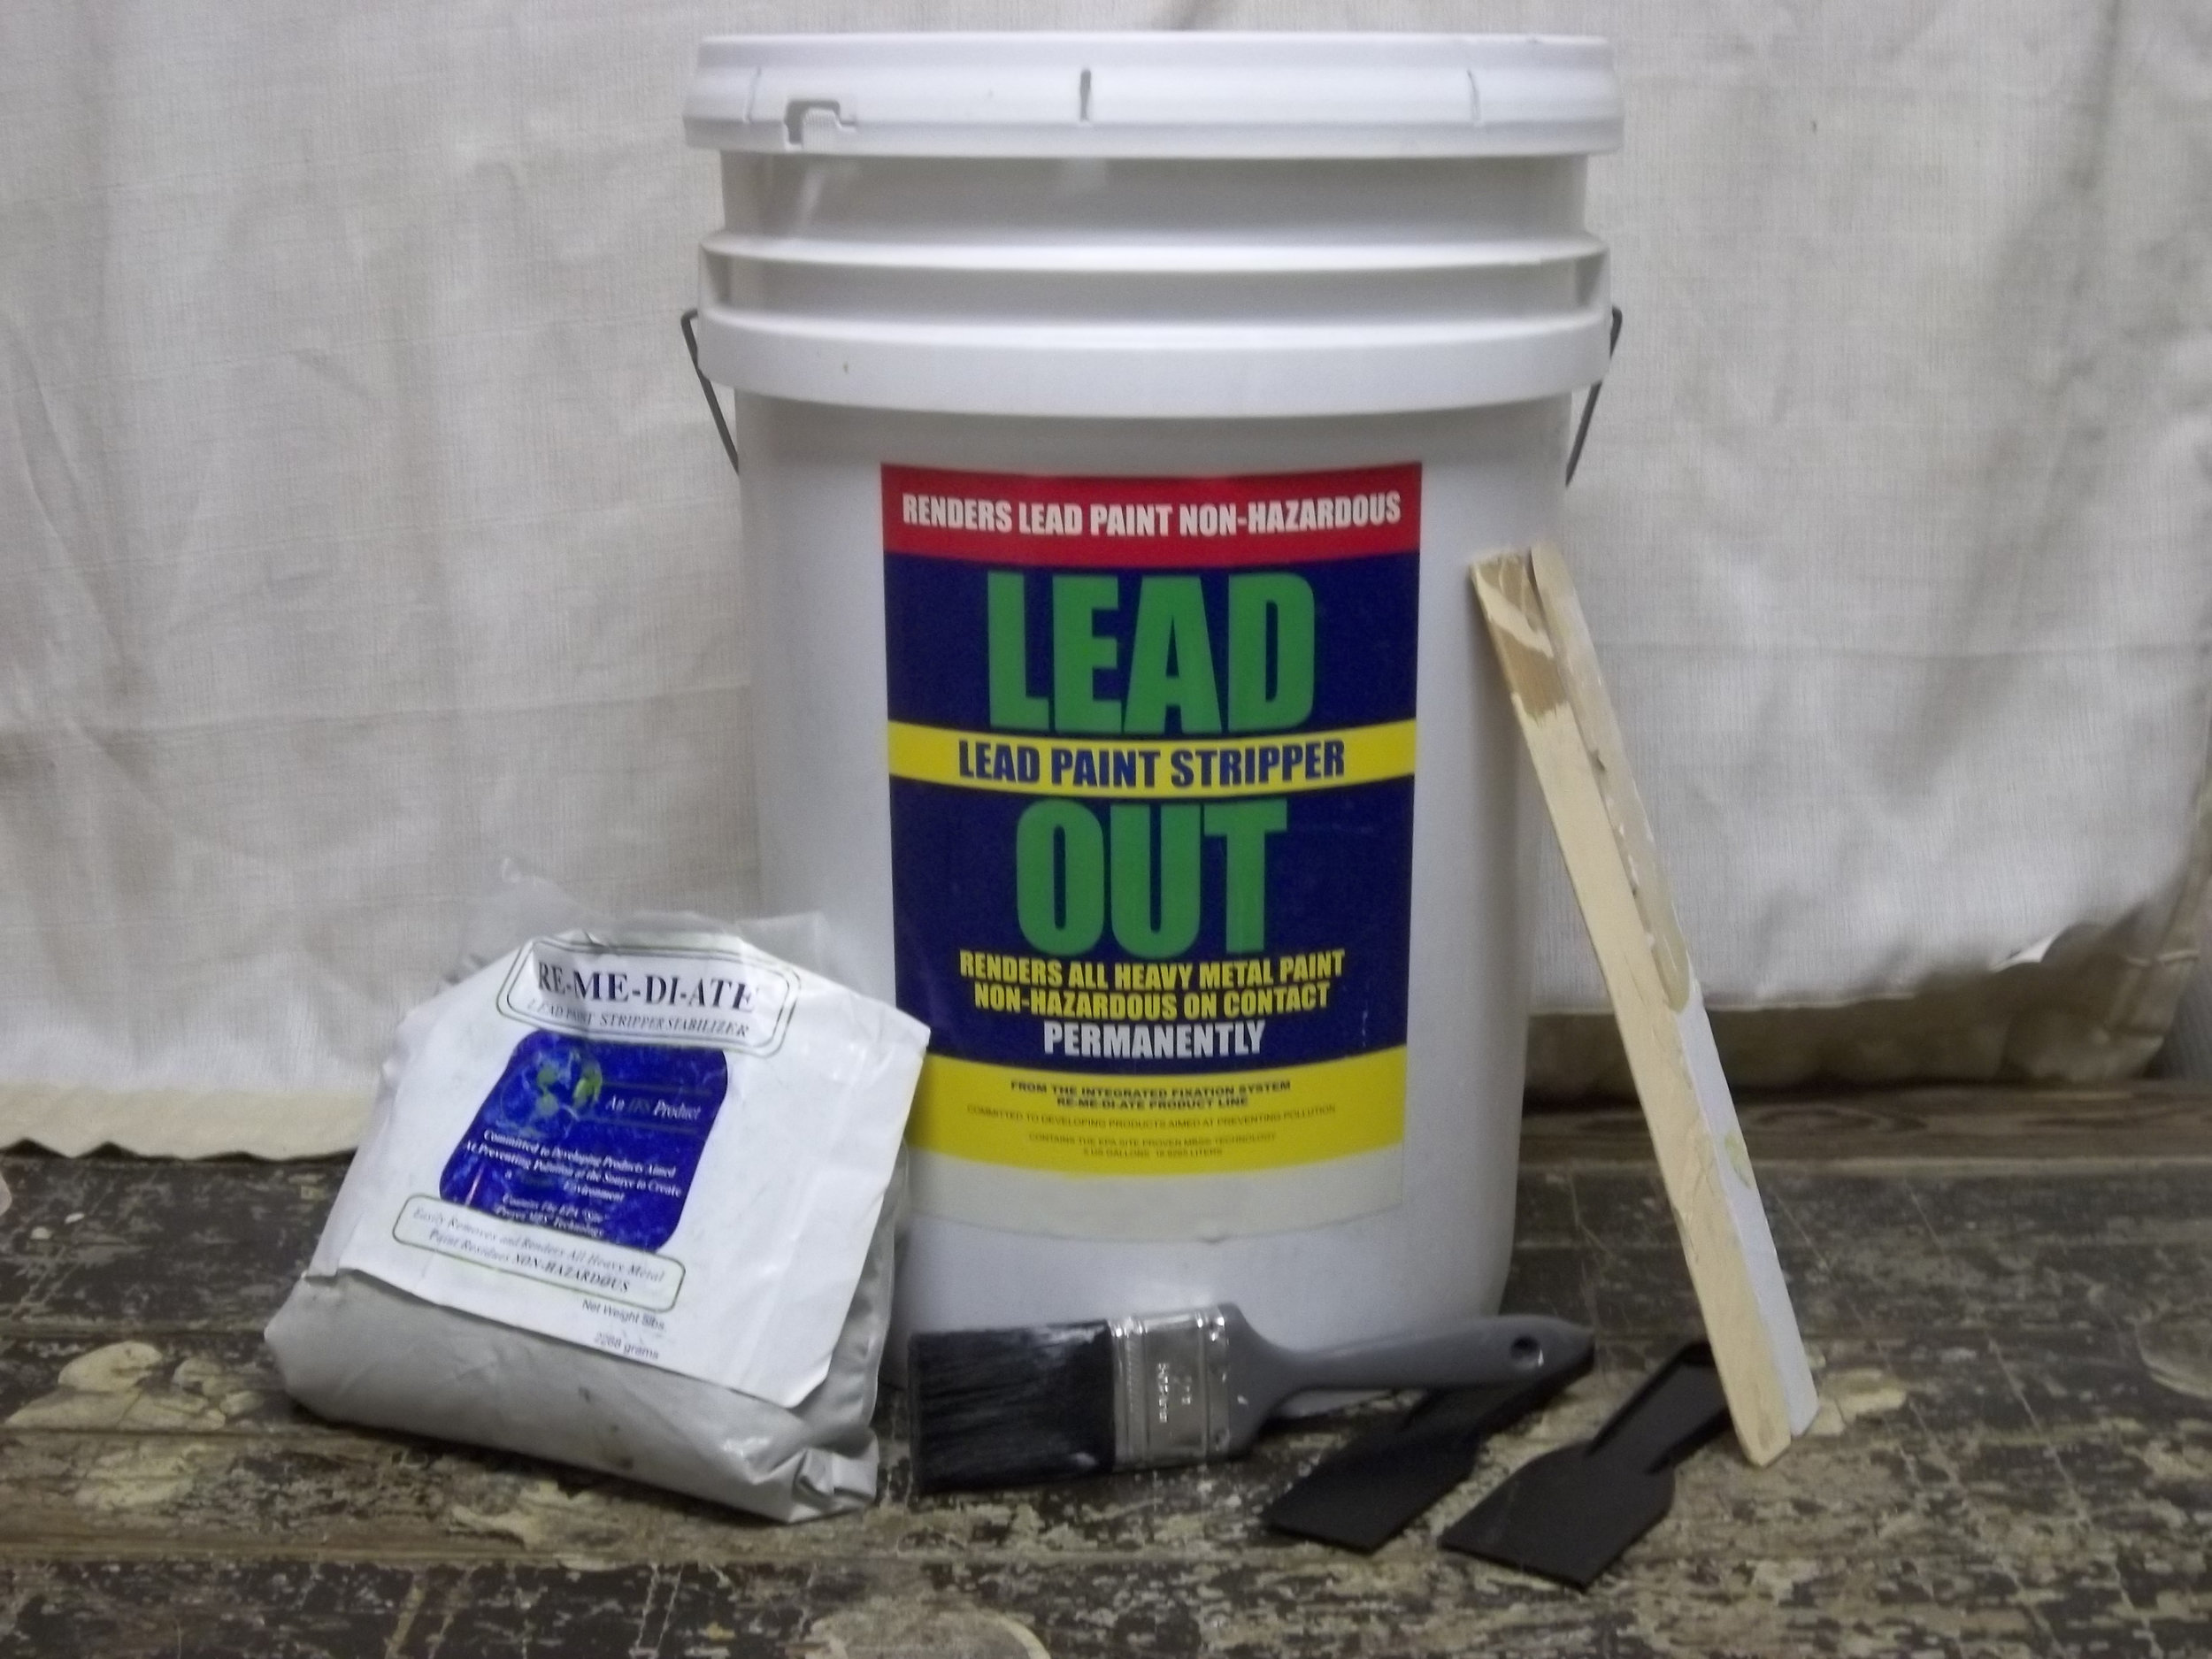 Non-Toxic Paint Strippers (All Types Compared) - My Chemical-Free